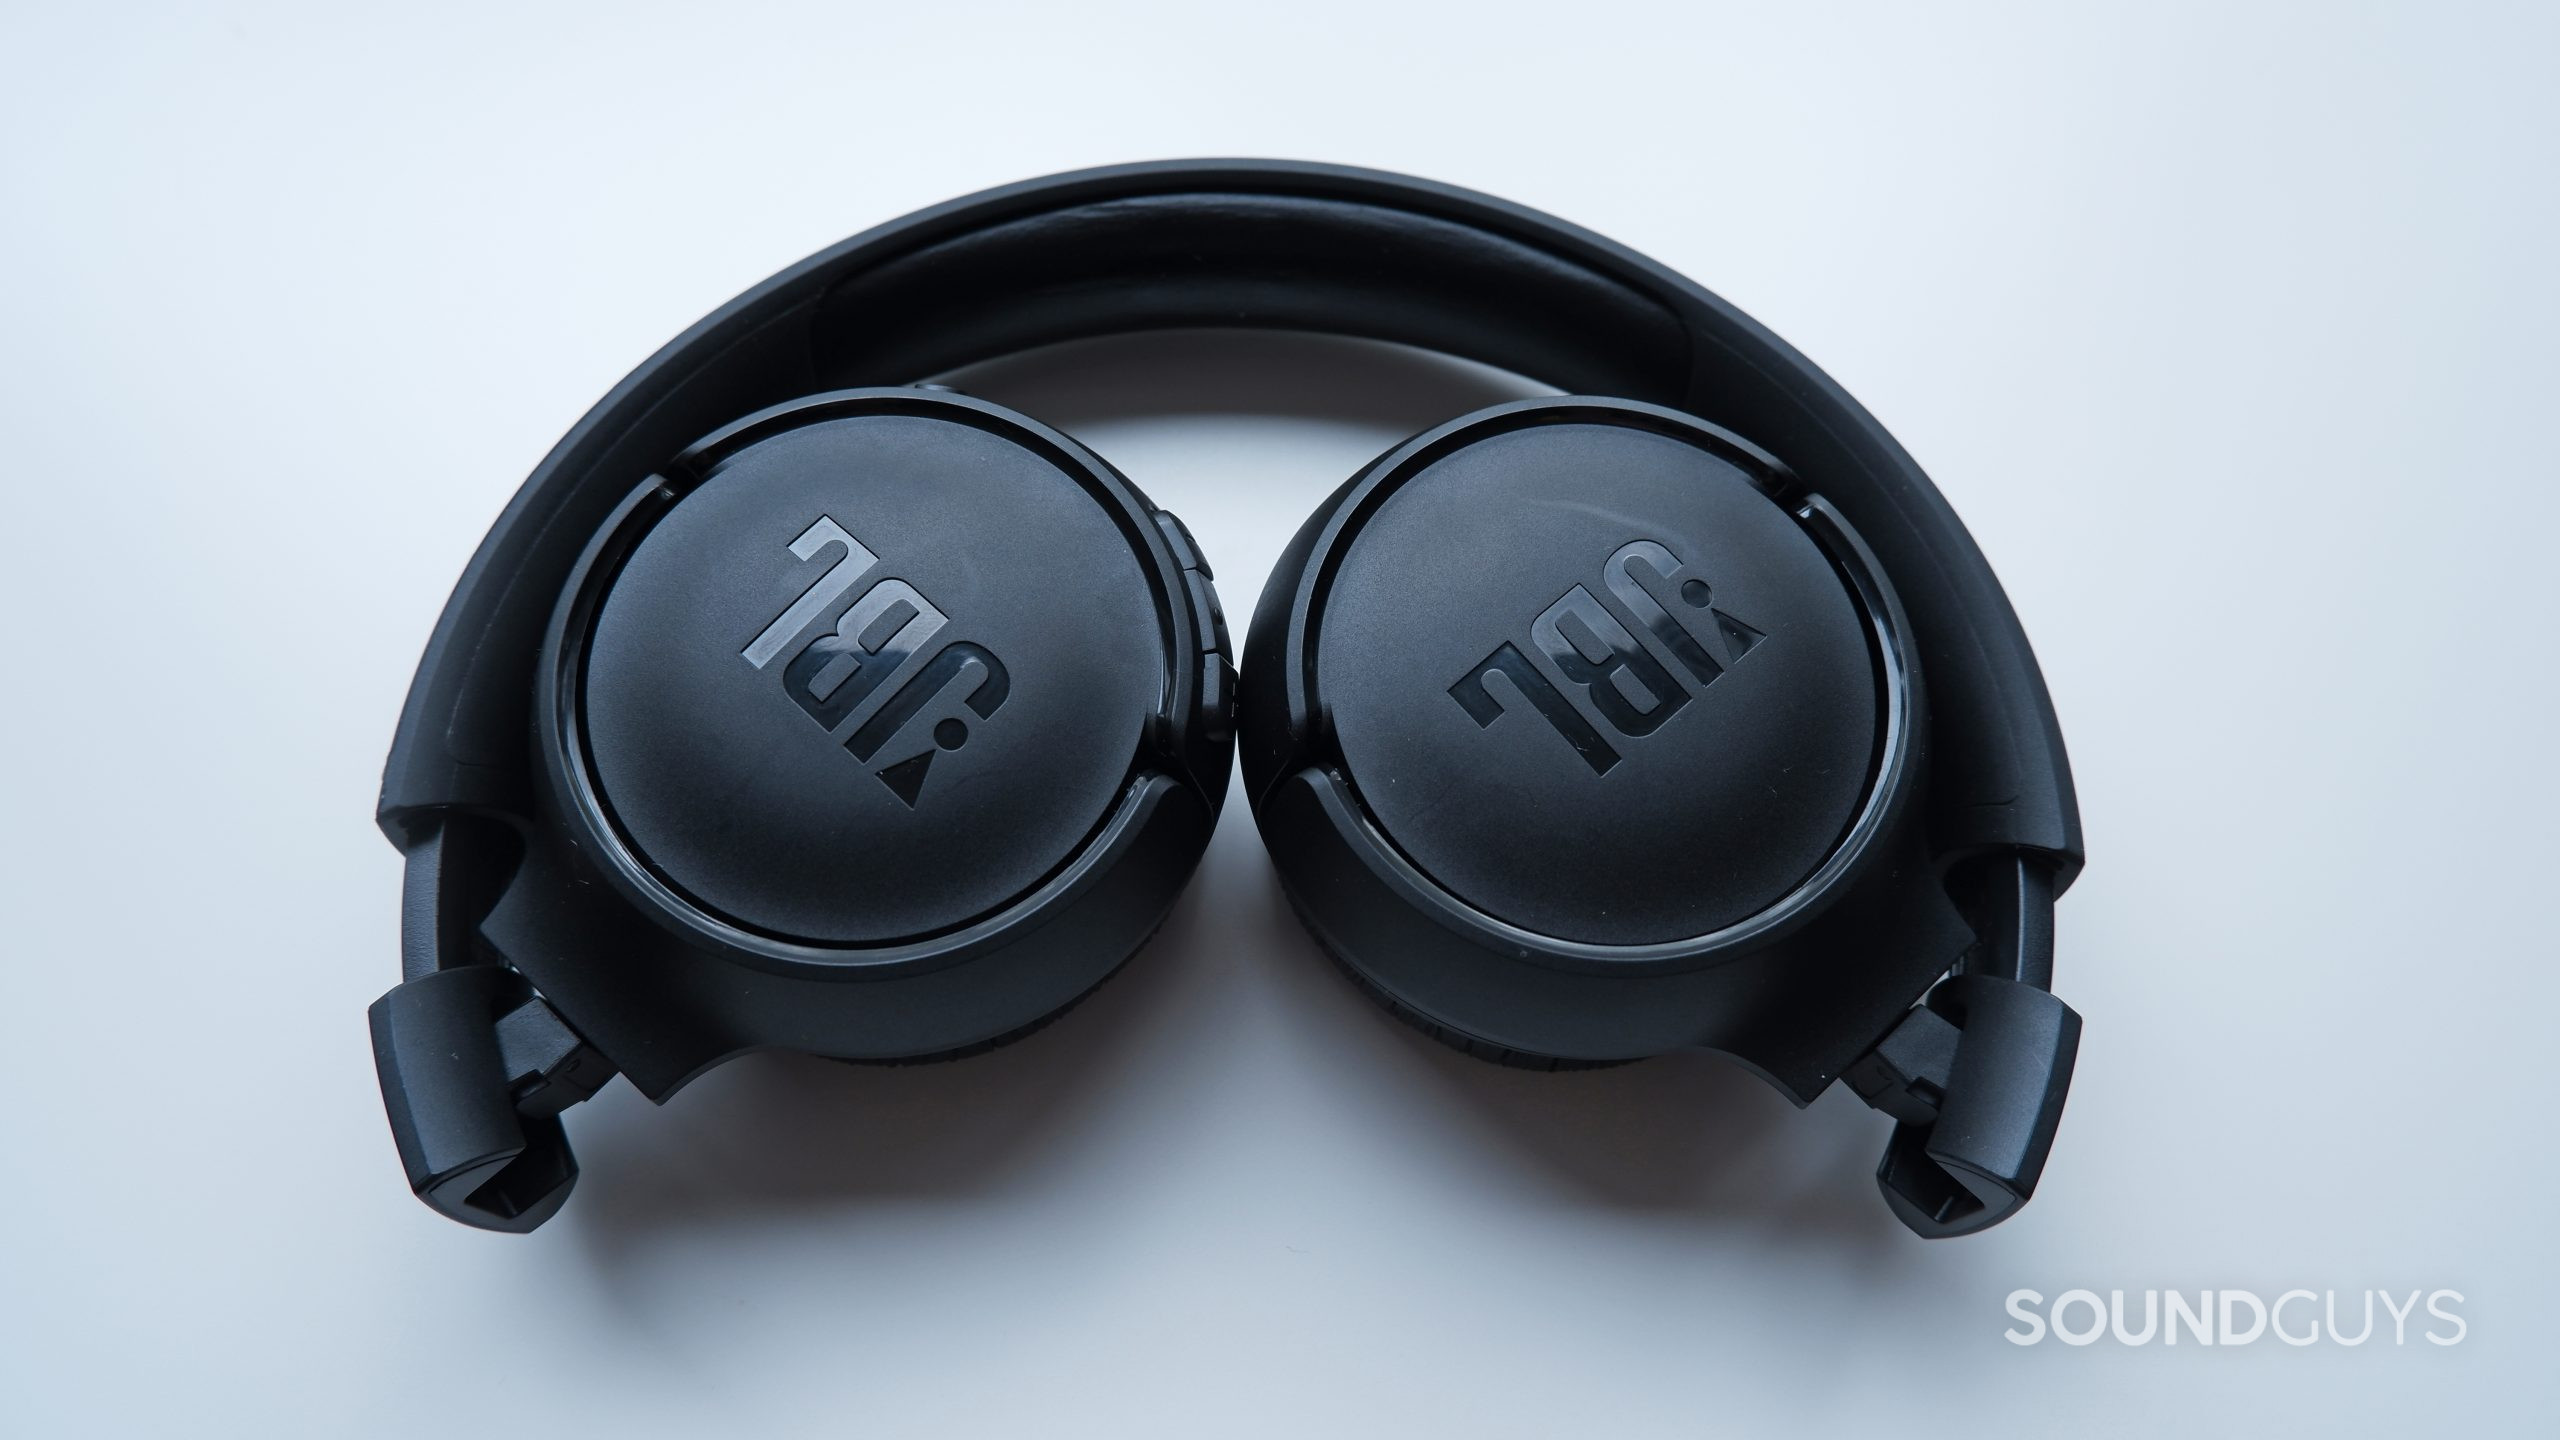 The JBL Tune 510BT, folded into its compact position.